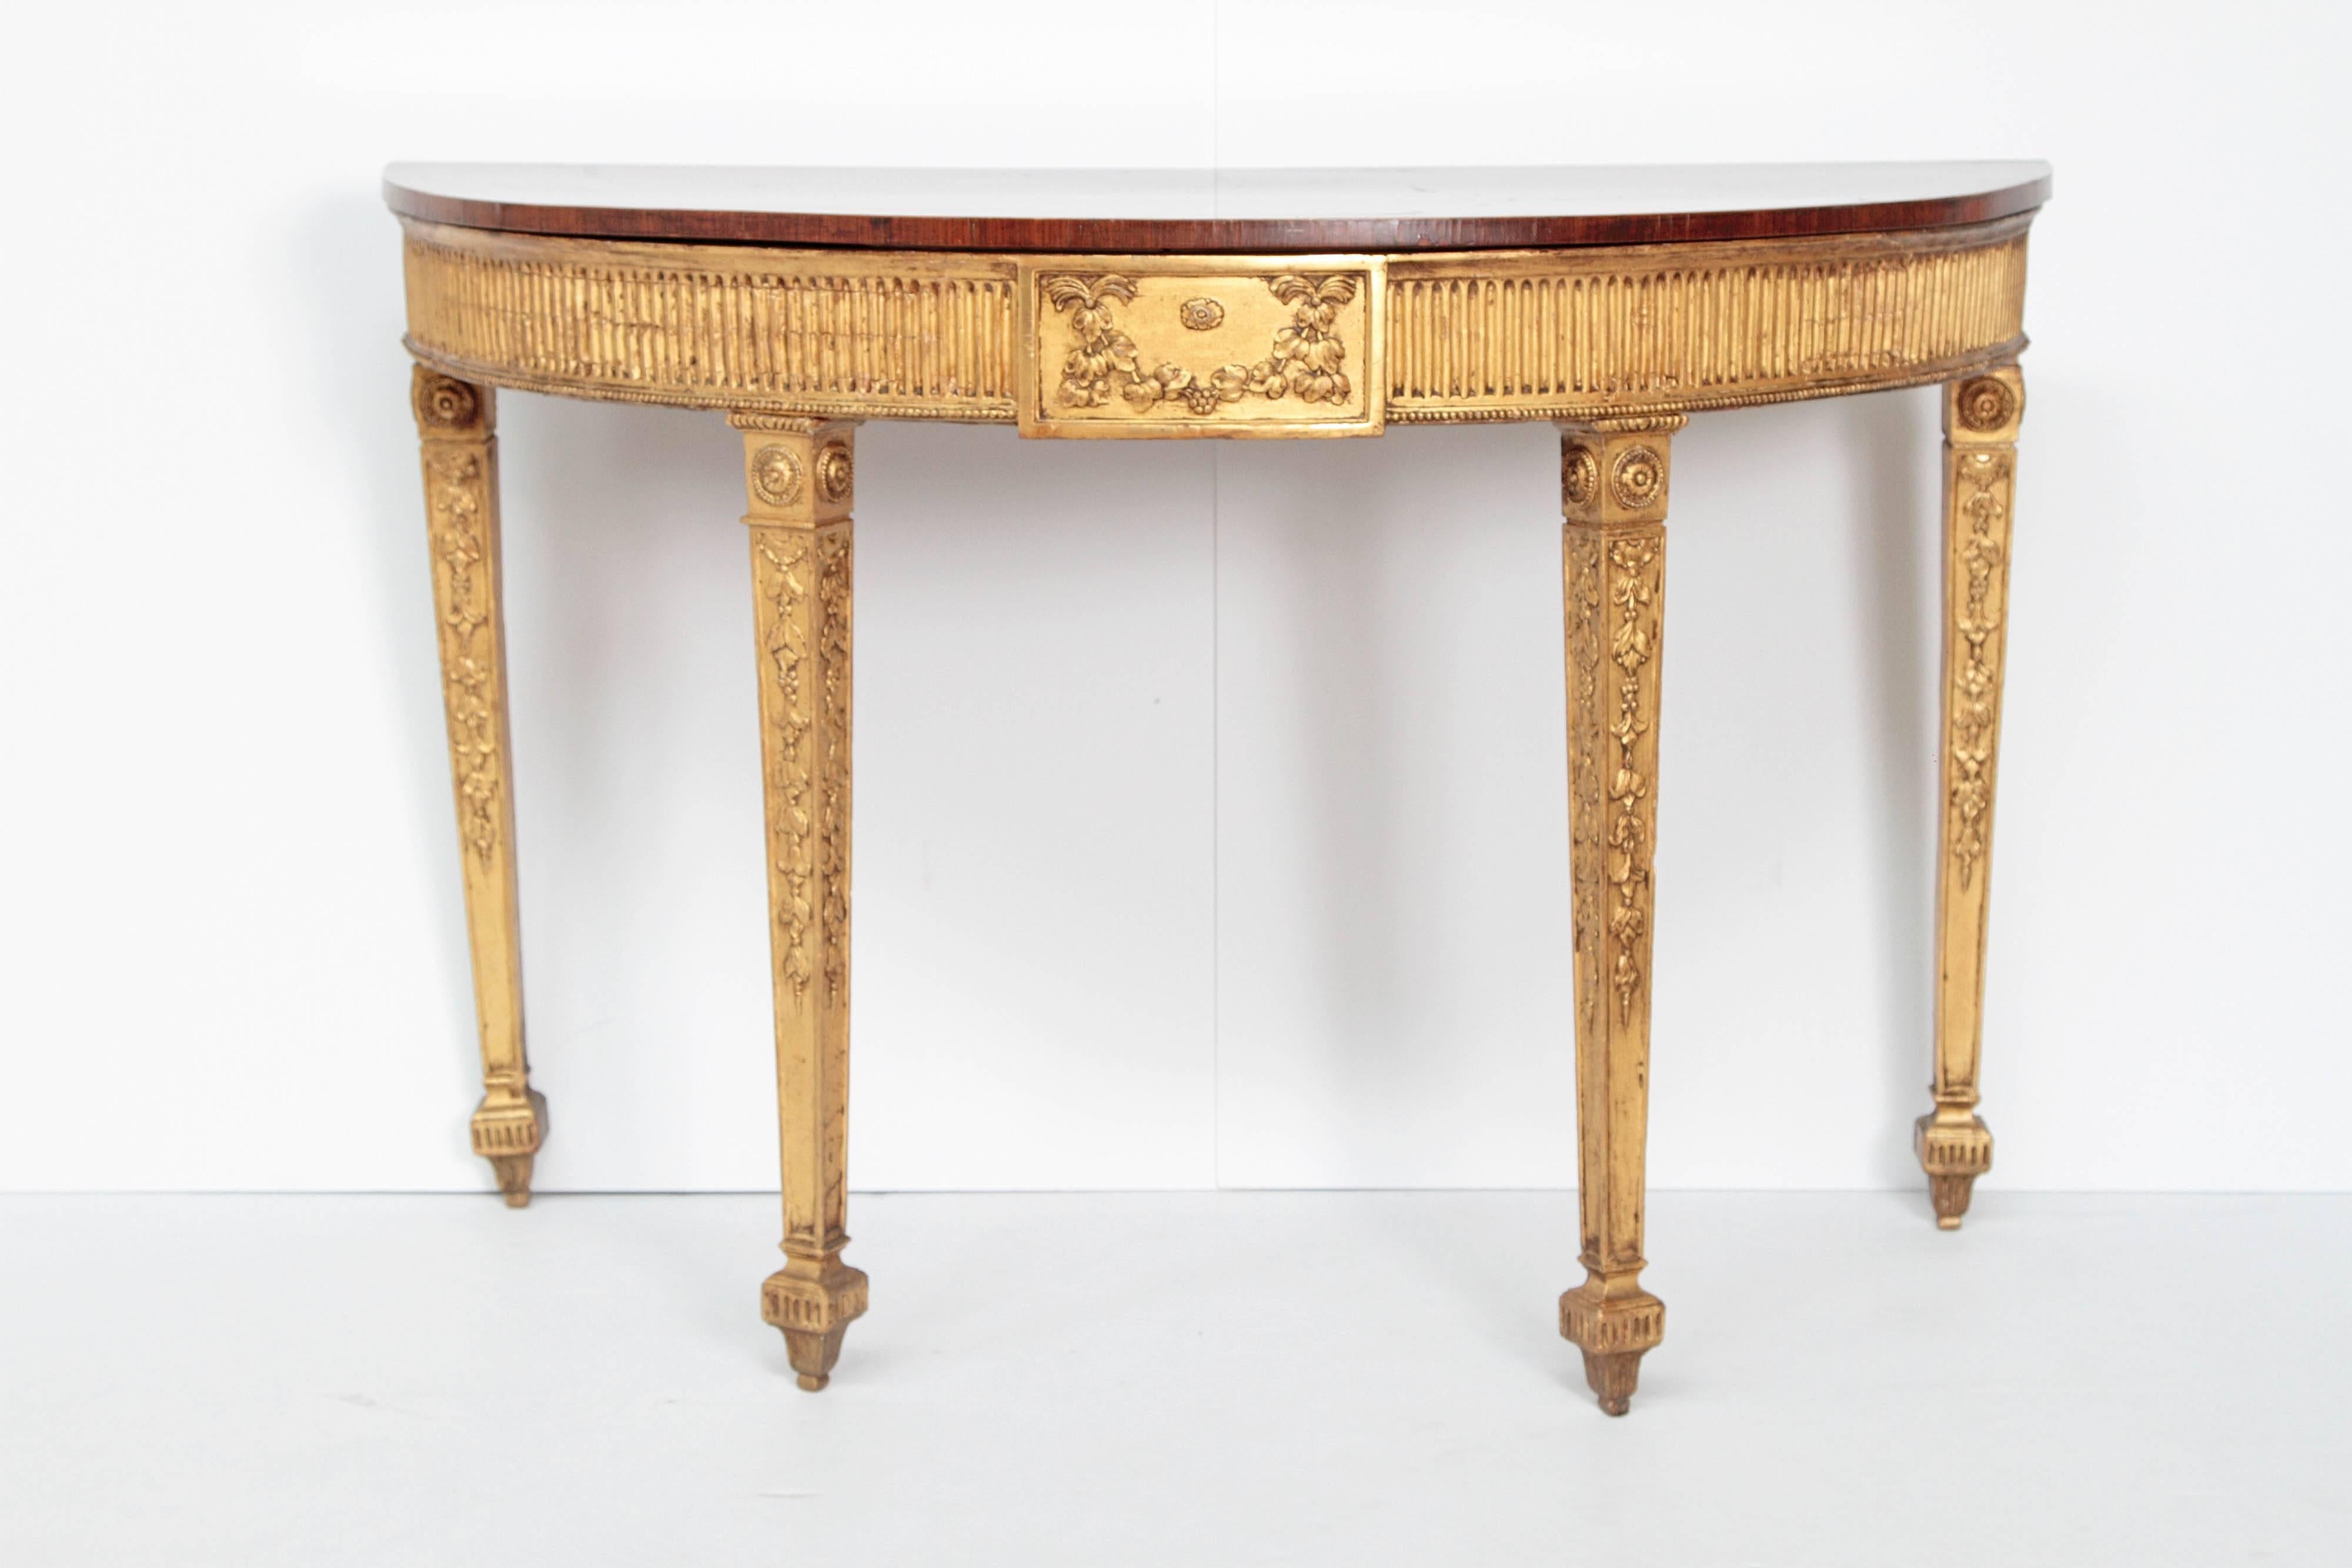 An English George III Adam pier table. Giltwood carved legs and apron. Satinwood top with painted accents, England, 1780.